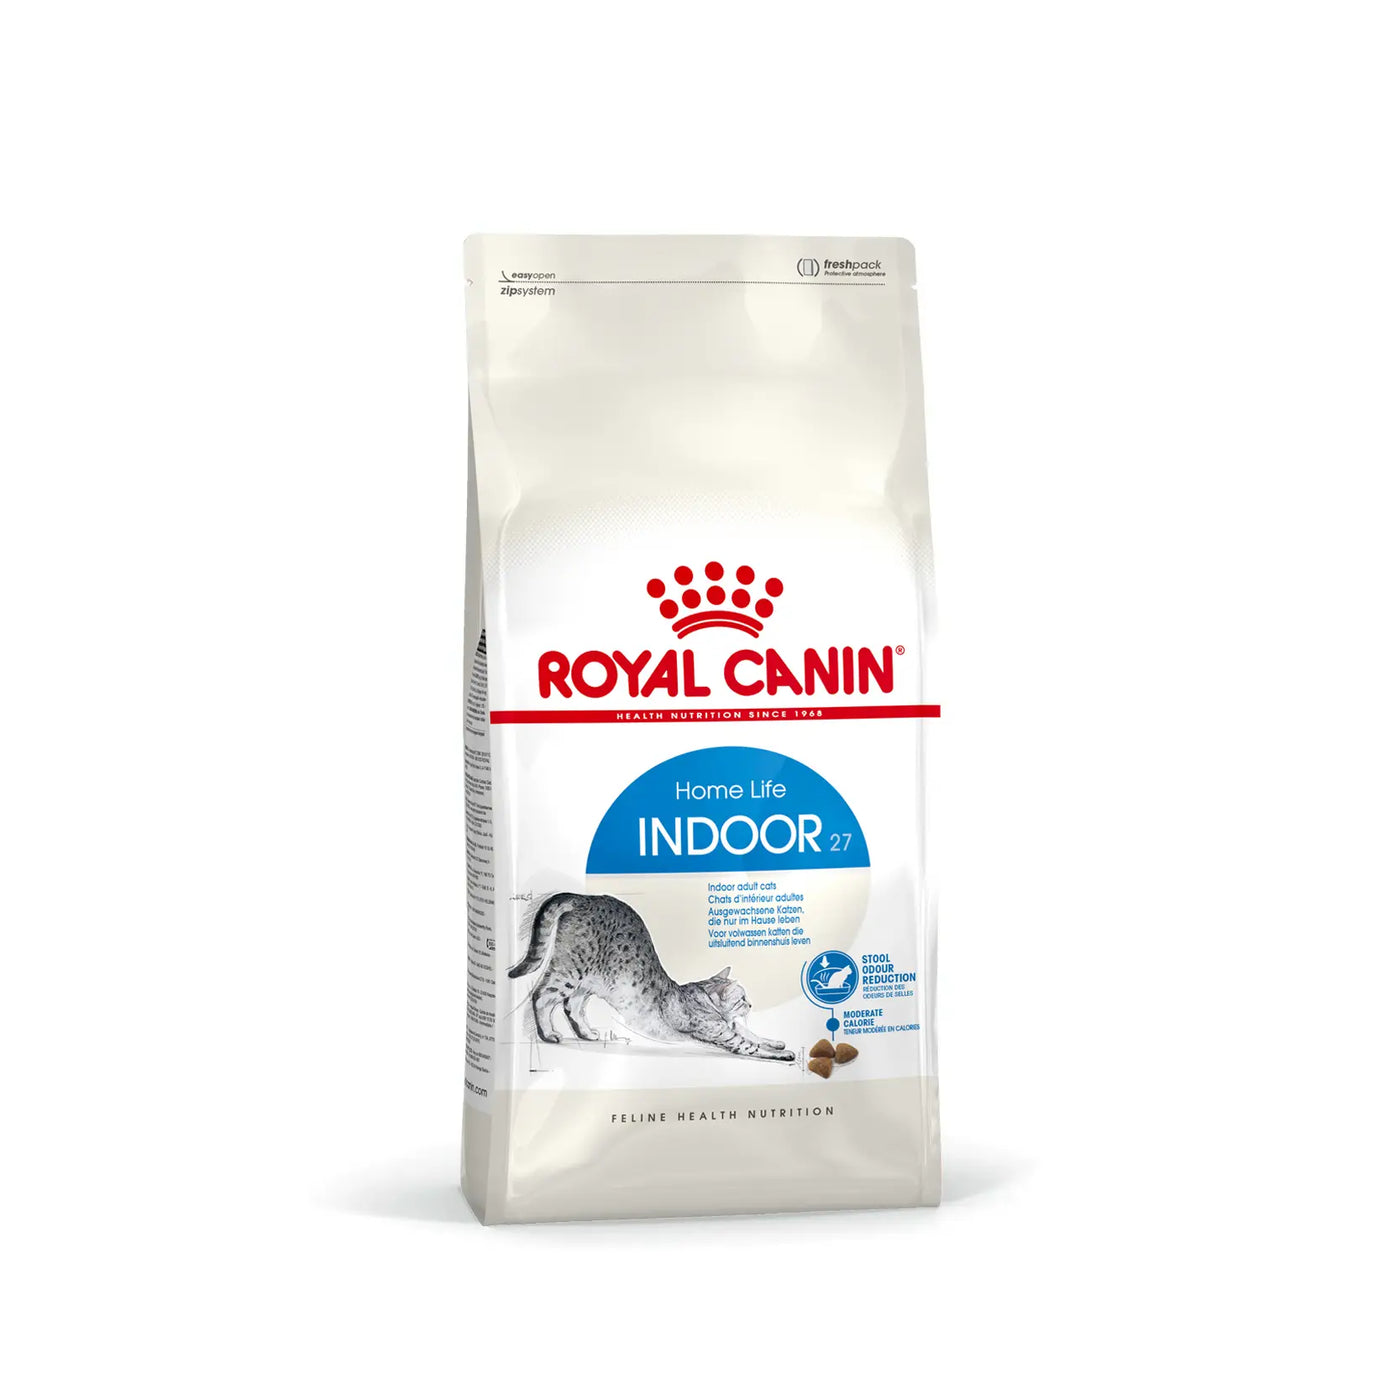 Royal Canin - Home Life Indoor Cat Dry Food